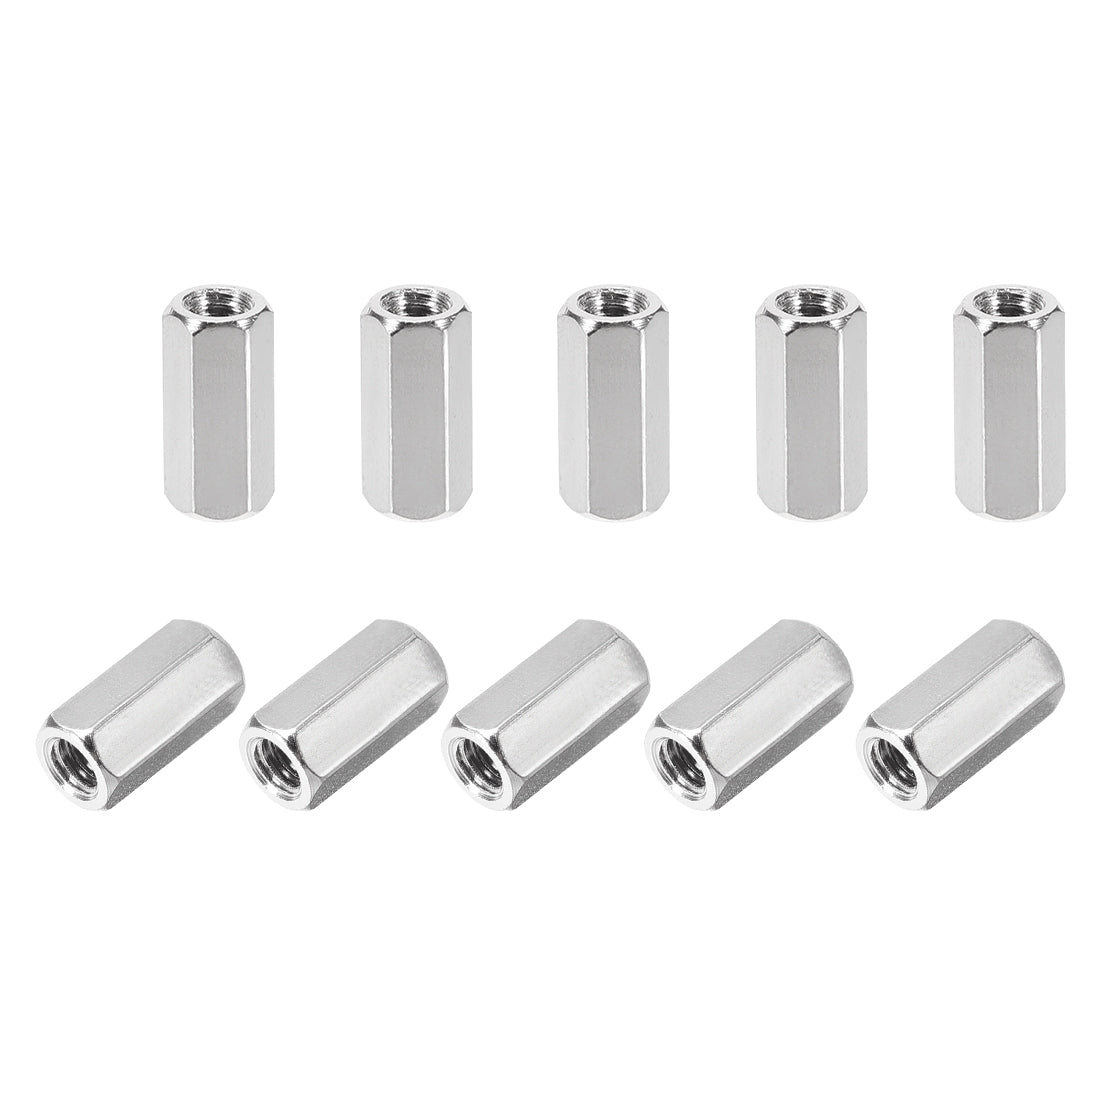 Uxcell Uxcell M4 x 40mm Female to Female Hex Nickel Plated Spacer Standoff 10pcs